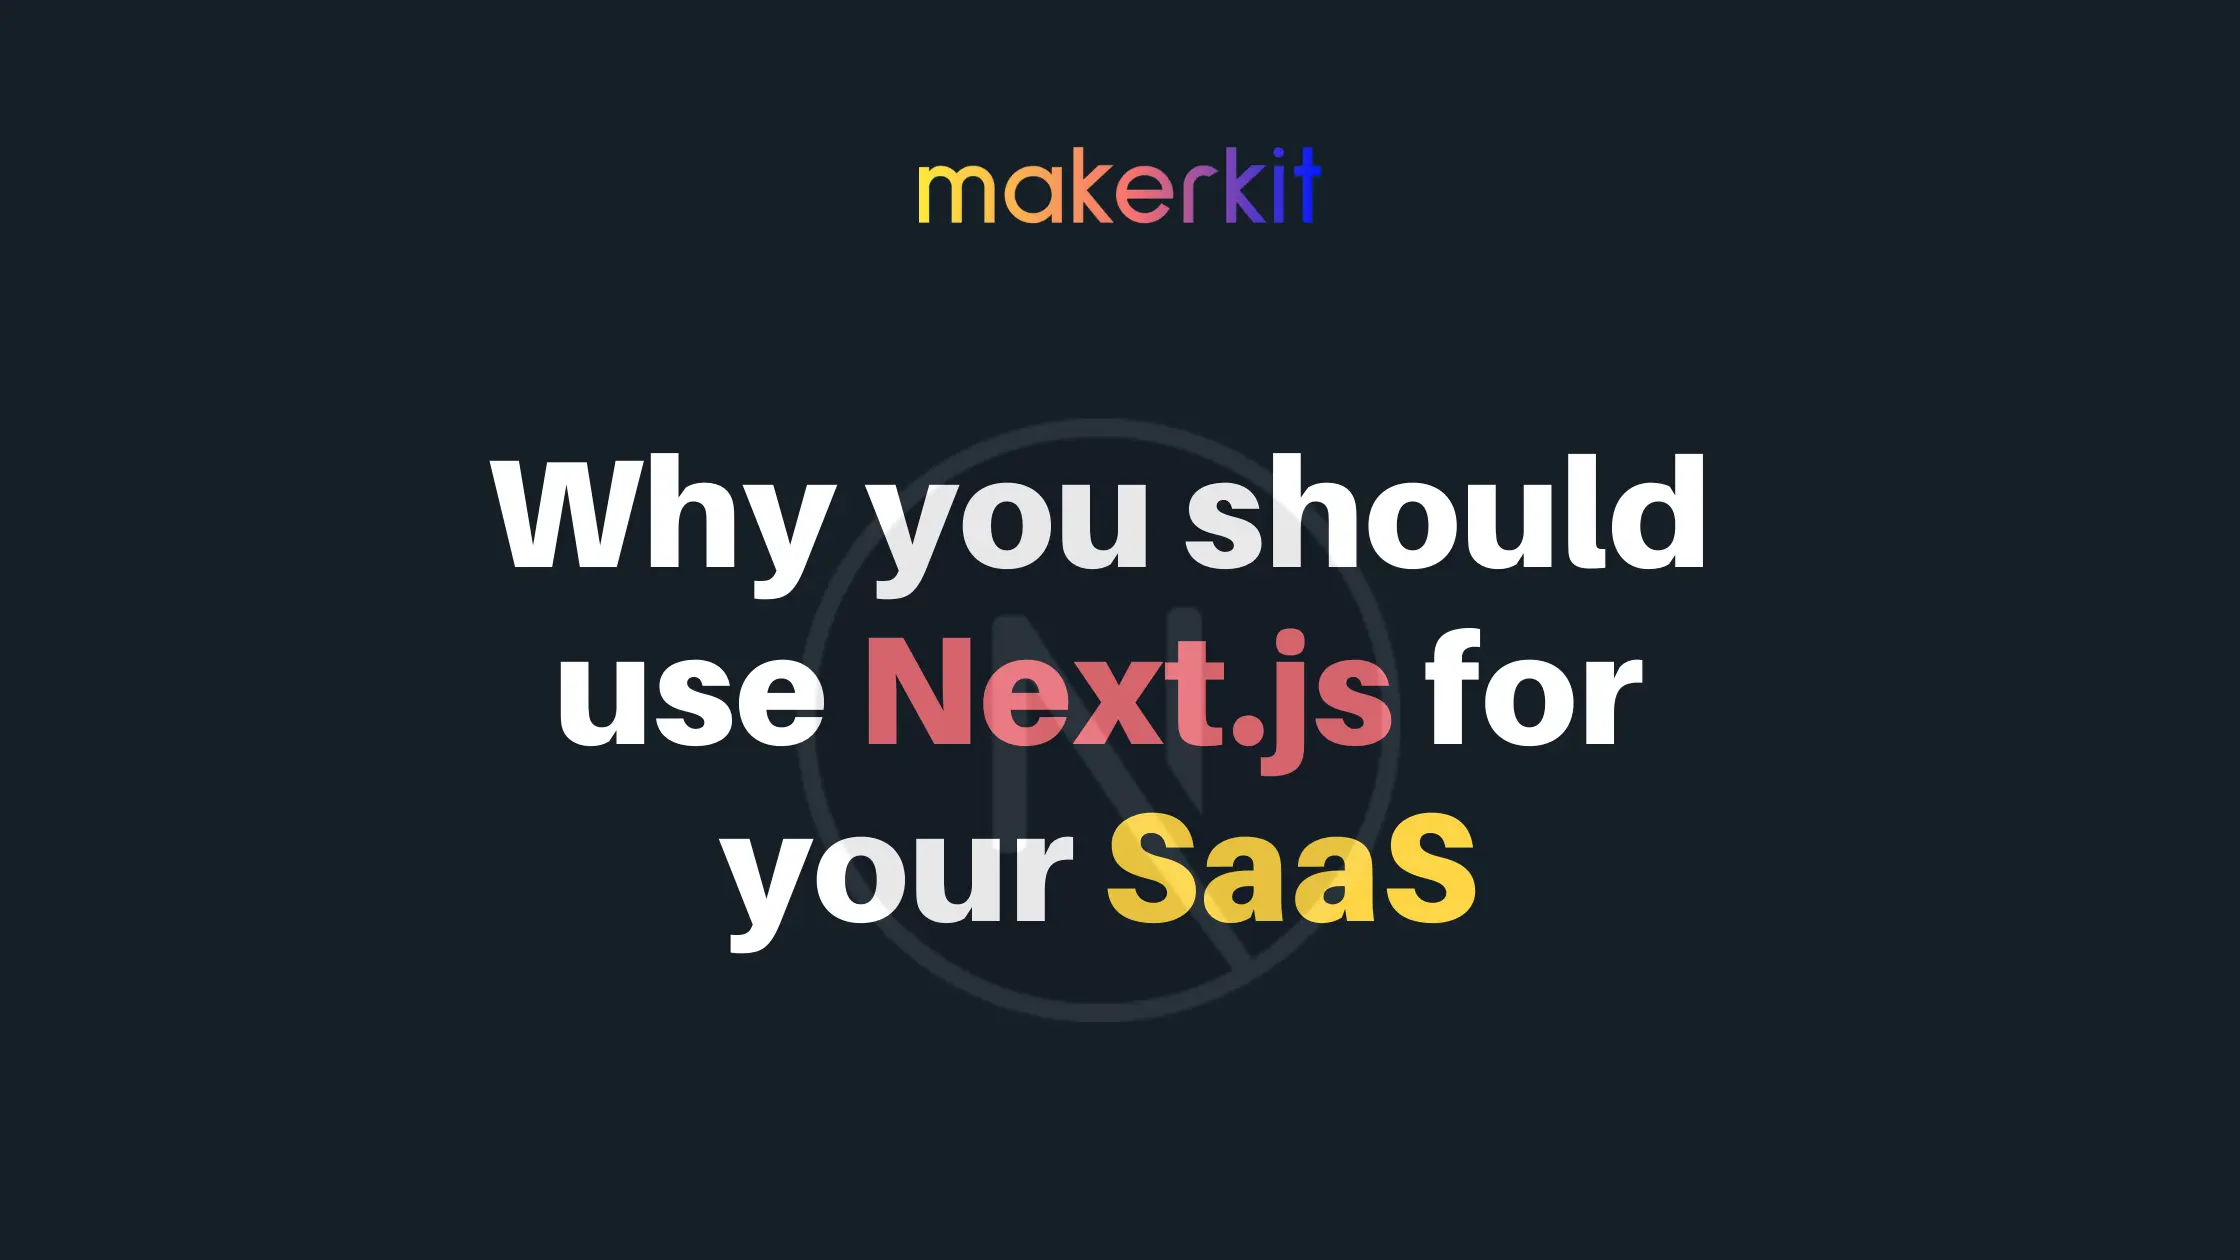 Cover Image for Why you should use Next.js for your SaaS